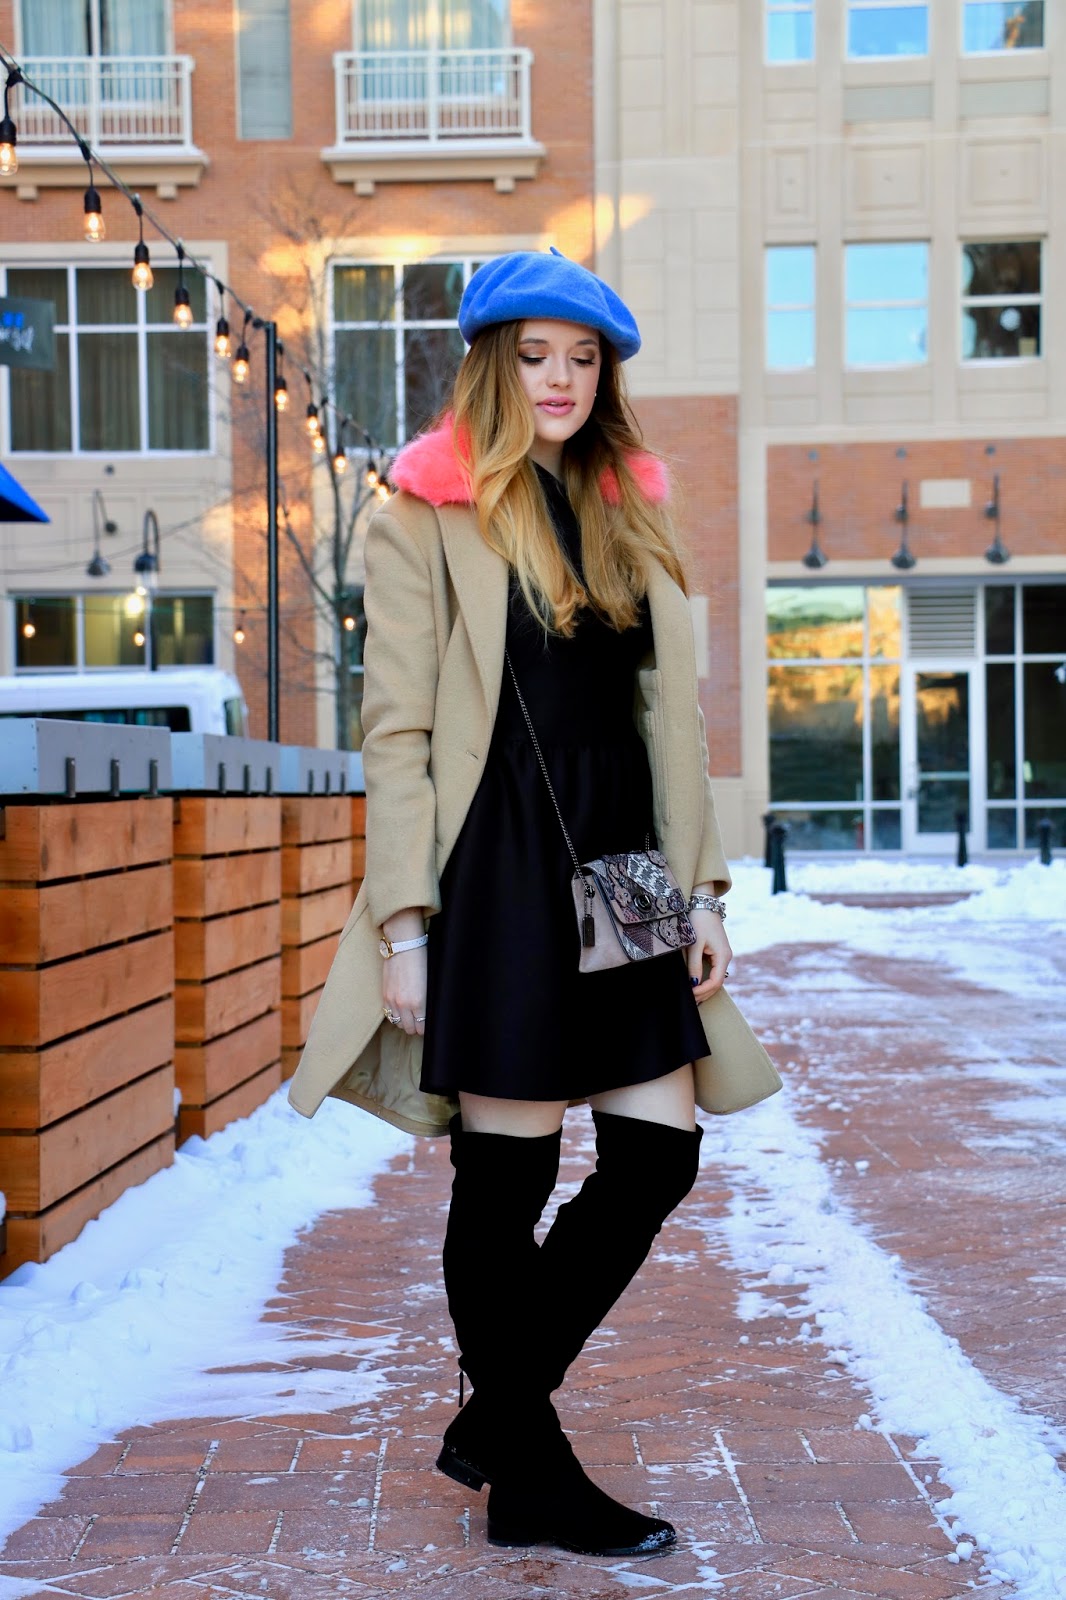 Nyc fashion blogger Kathleen Harper's winter outfit ideas